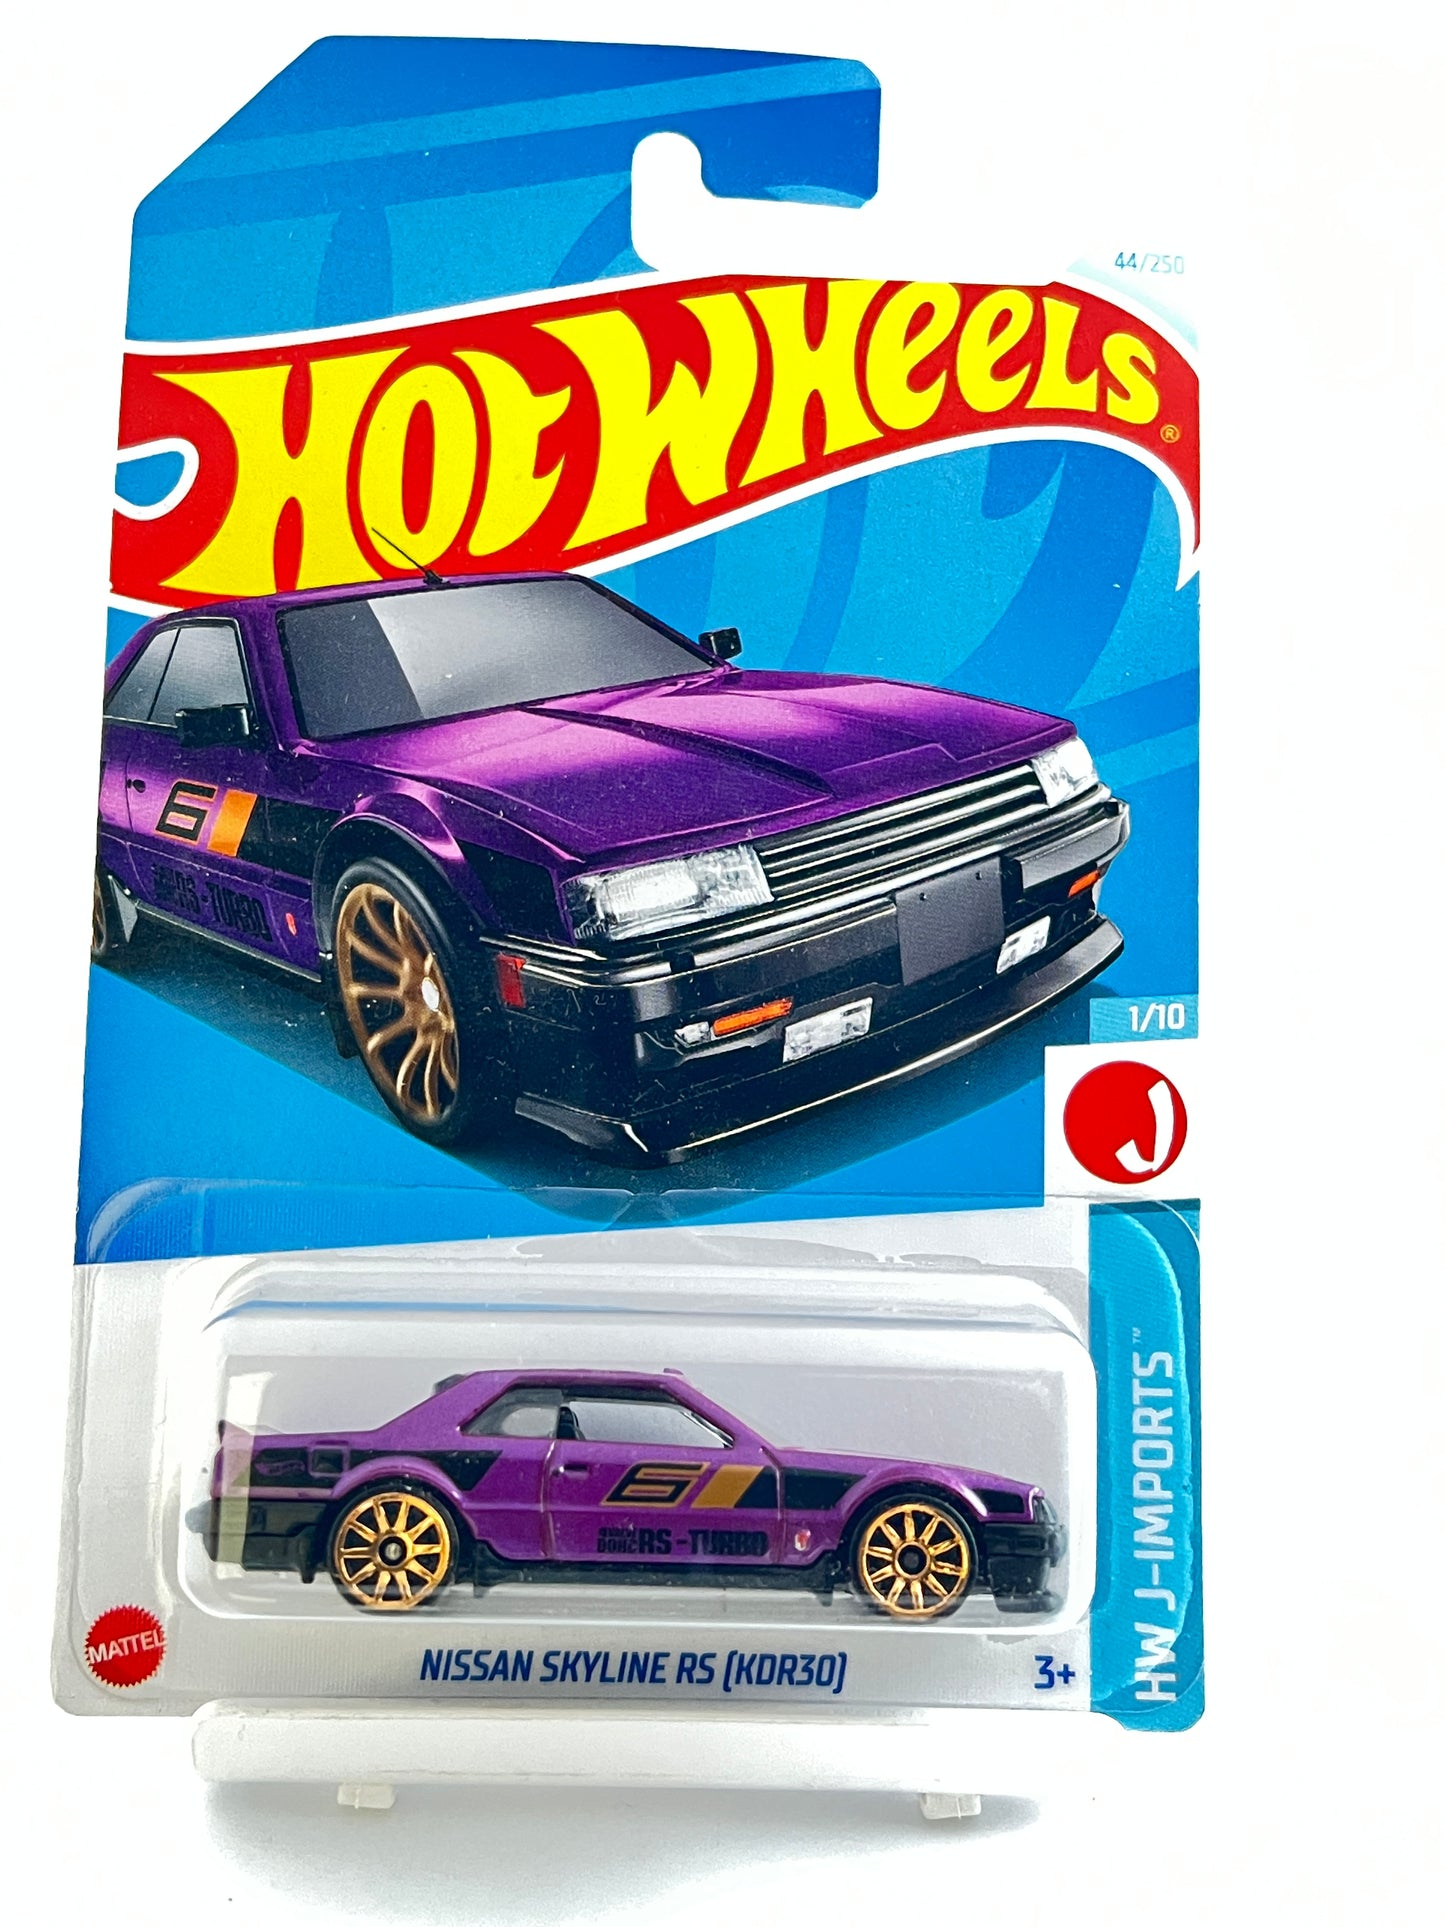 NISSAN SKYLINE RS (KDR30) - PURPLE -BLISTER SQUEEZE - 4B